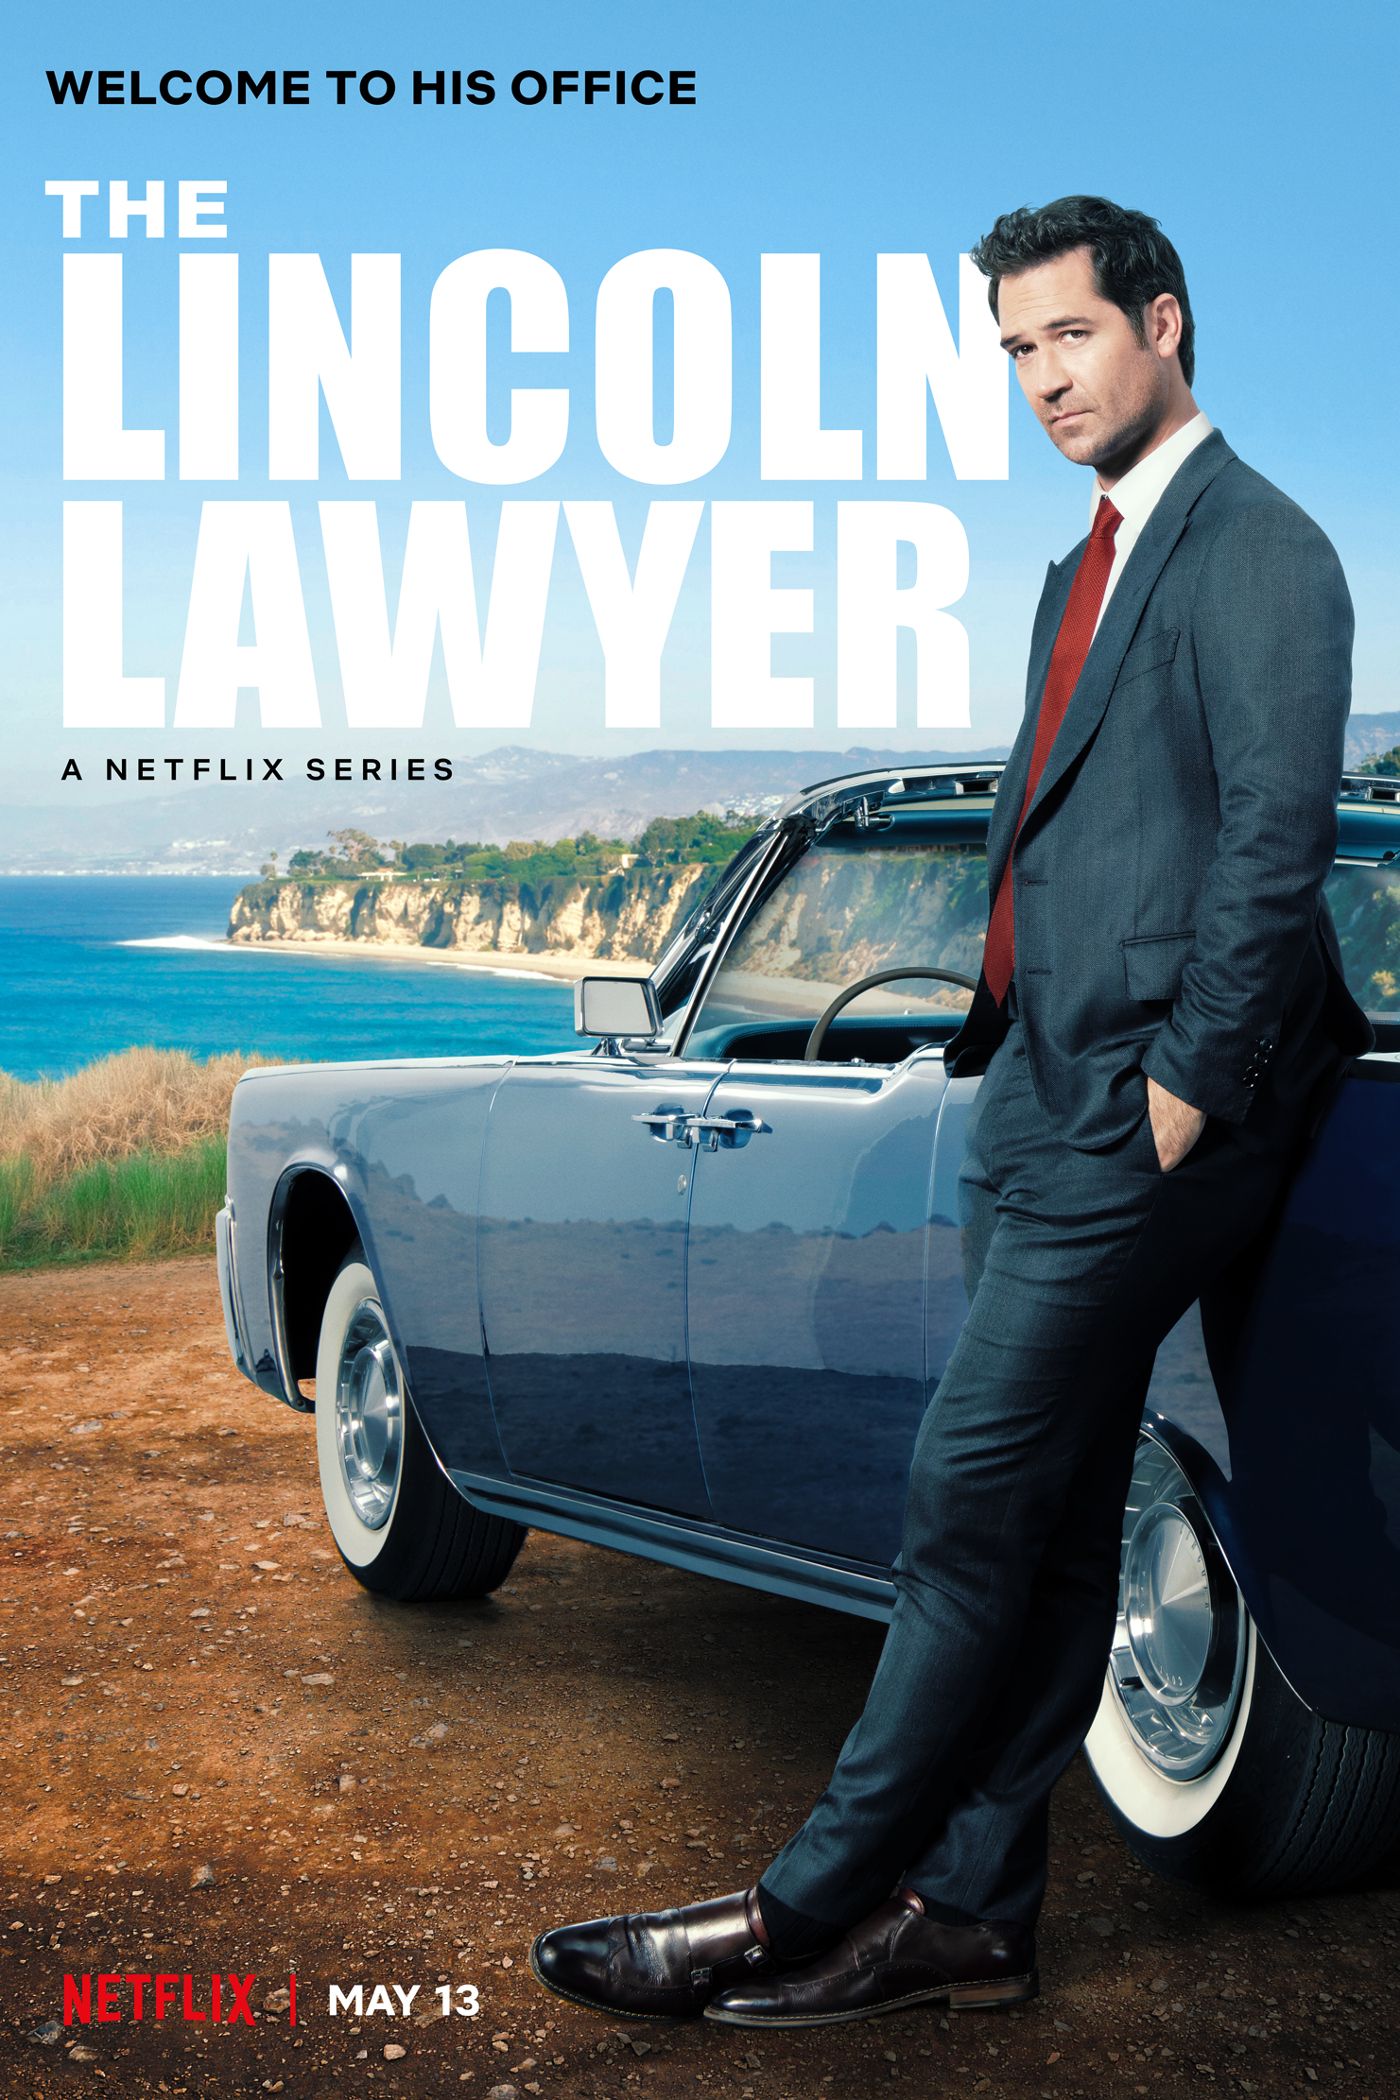 Lincoln Lawyer Season 3 Cast Adds 4 New Characters